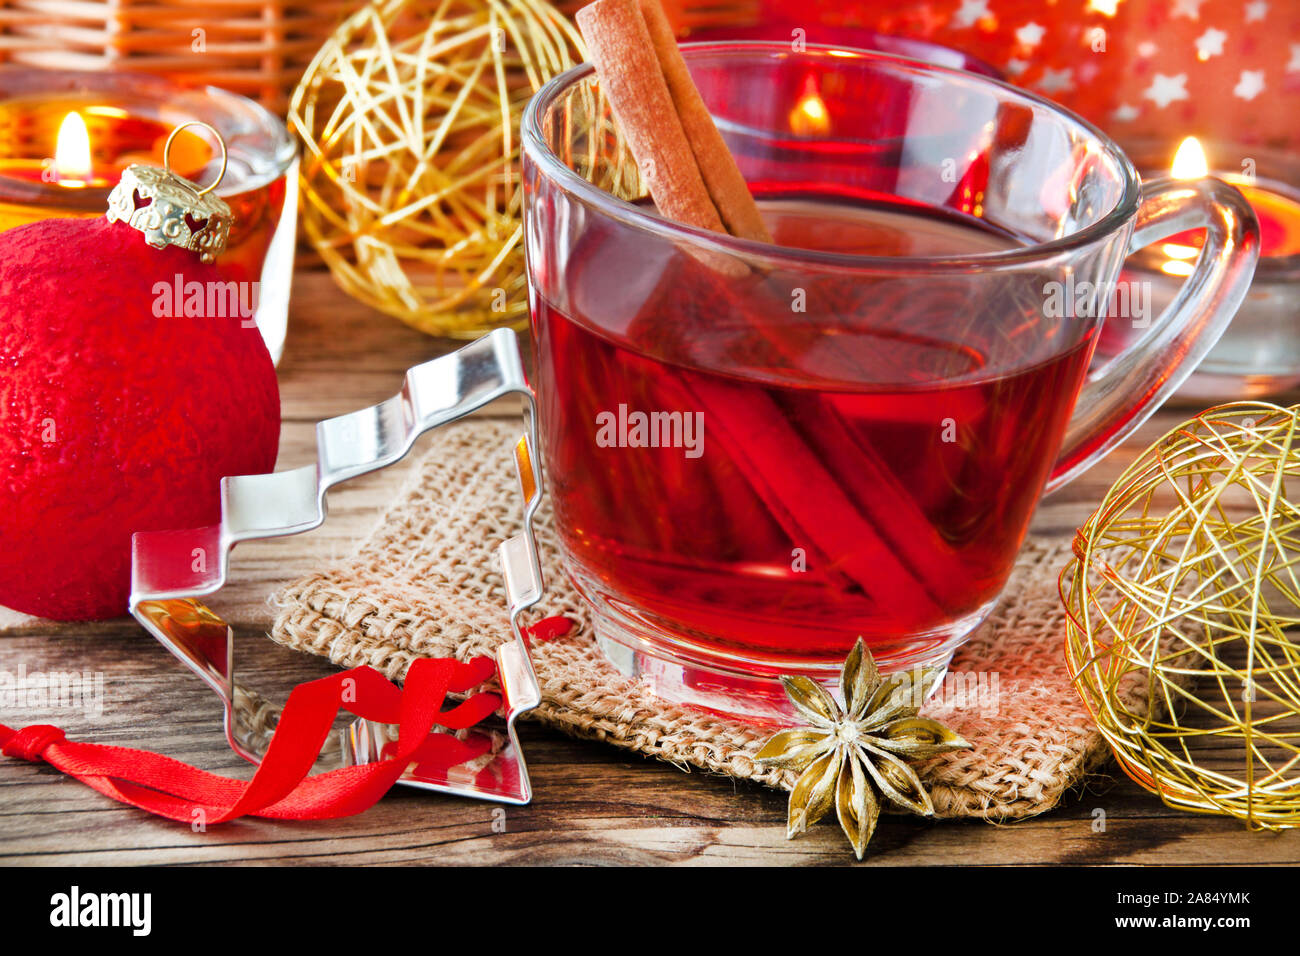 Christmas mulled wine and decoration Stock Photo